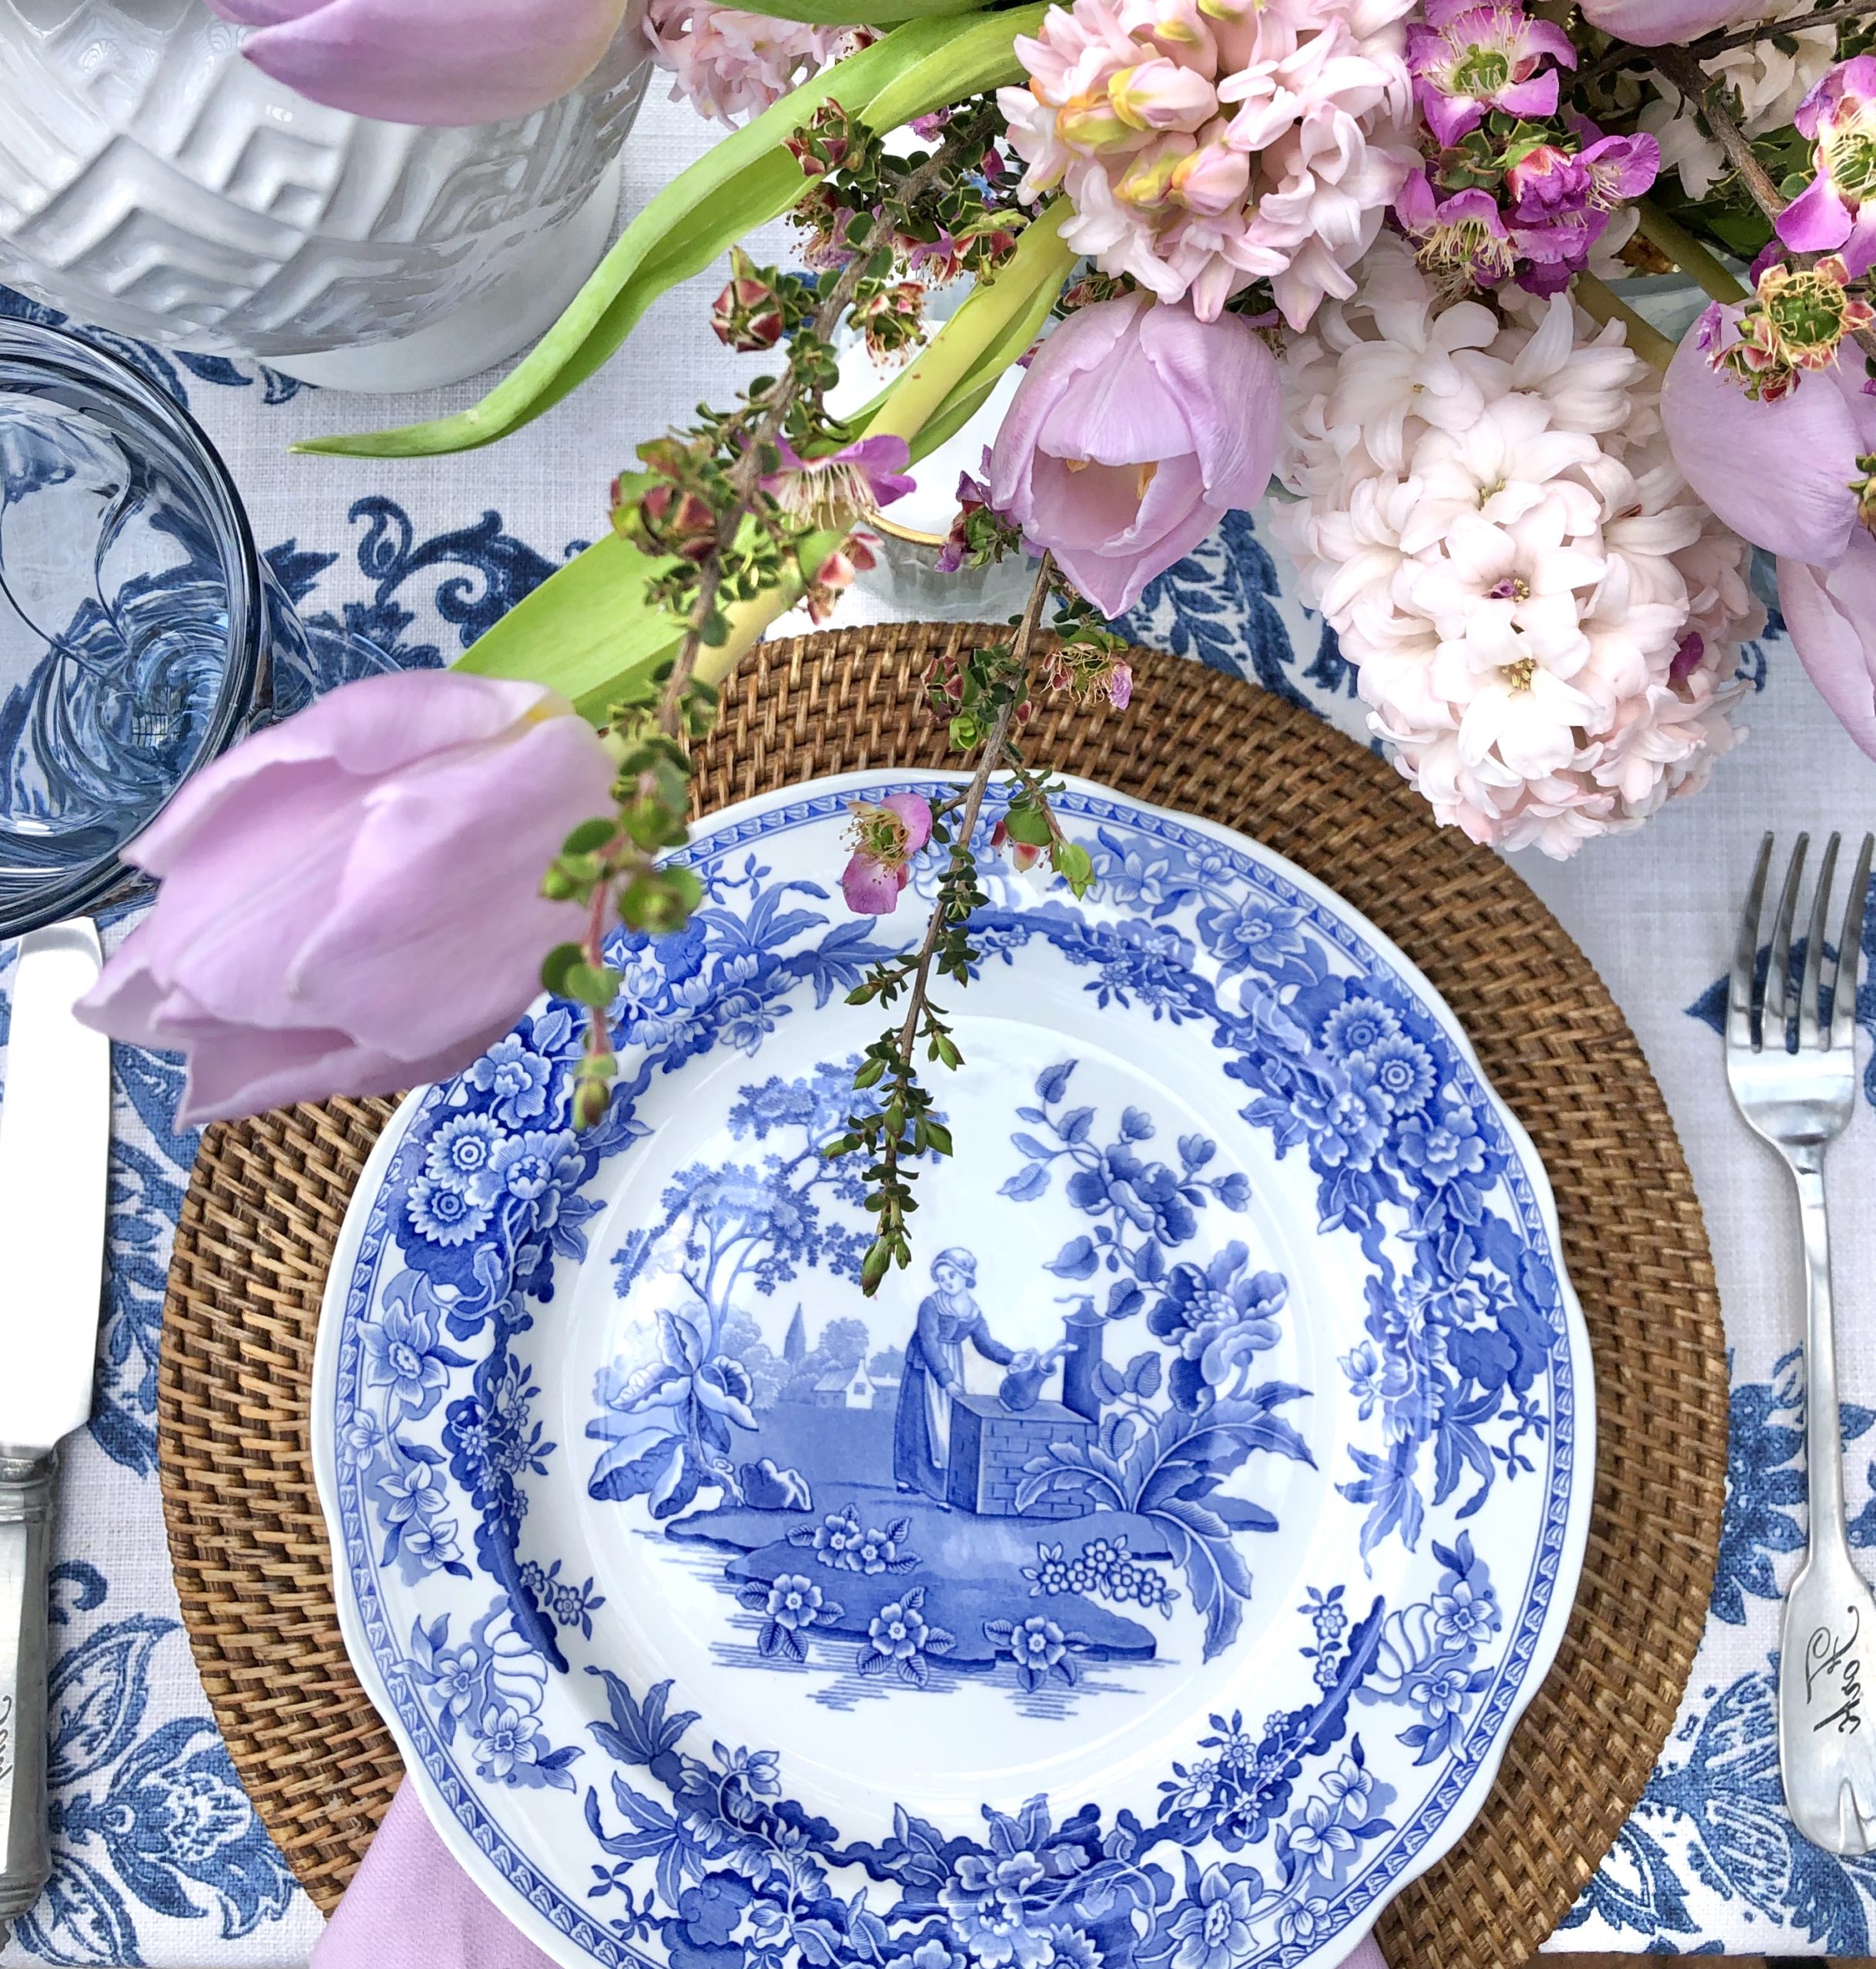 Blue and white place setting